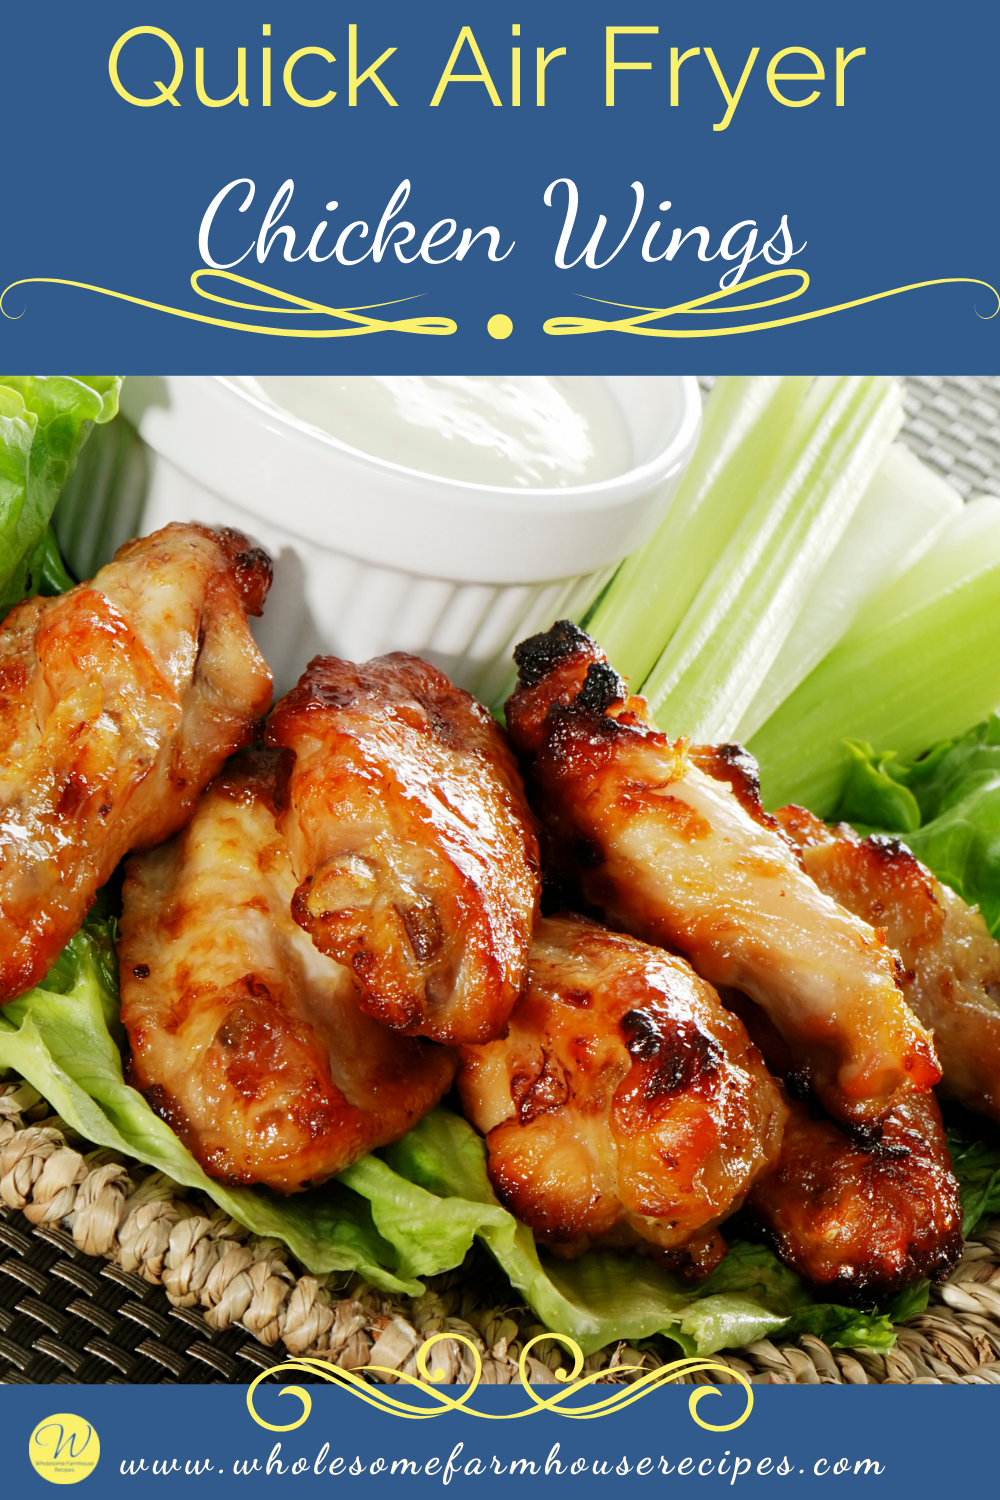 Quick Air Fryer Chicken Wings